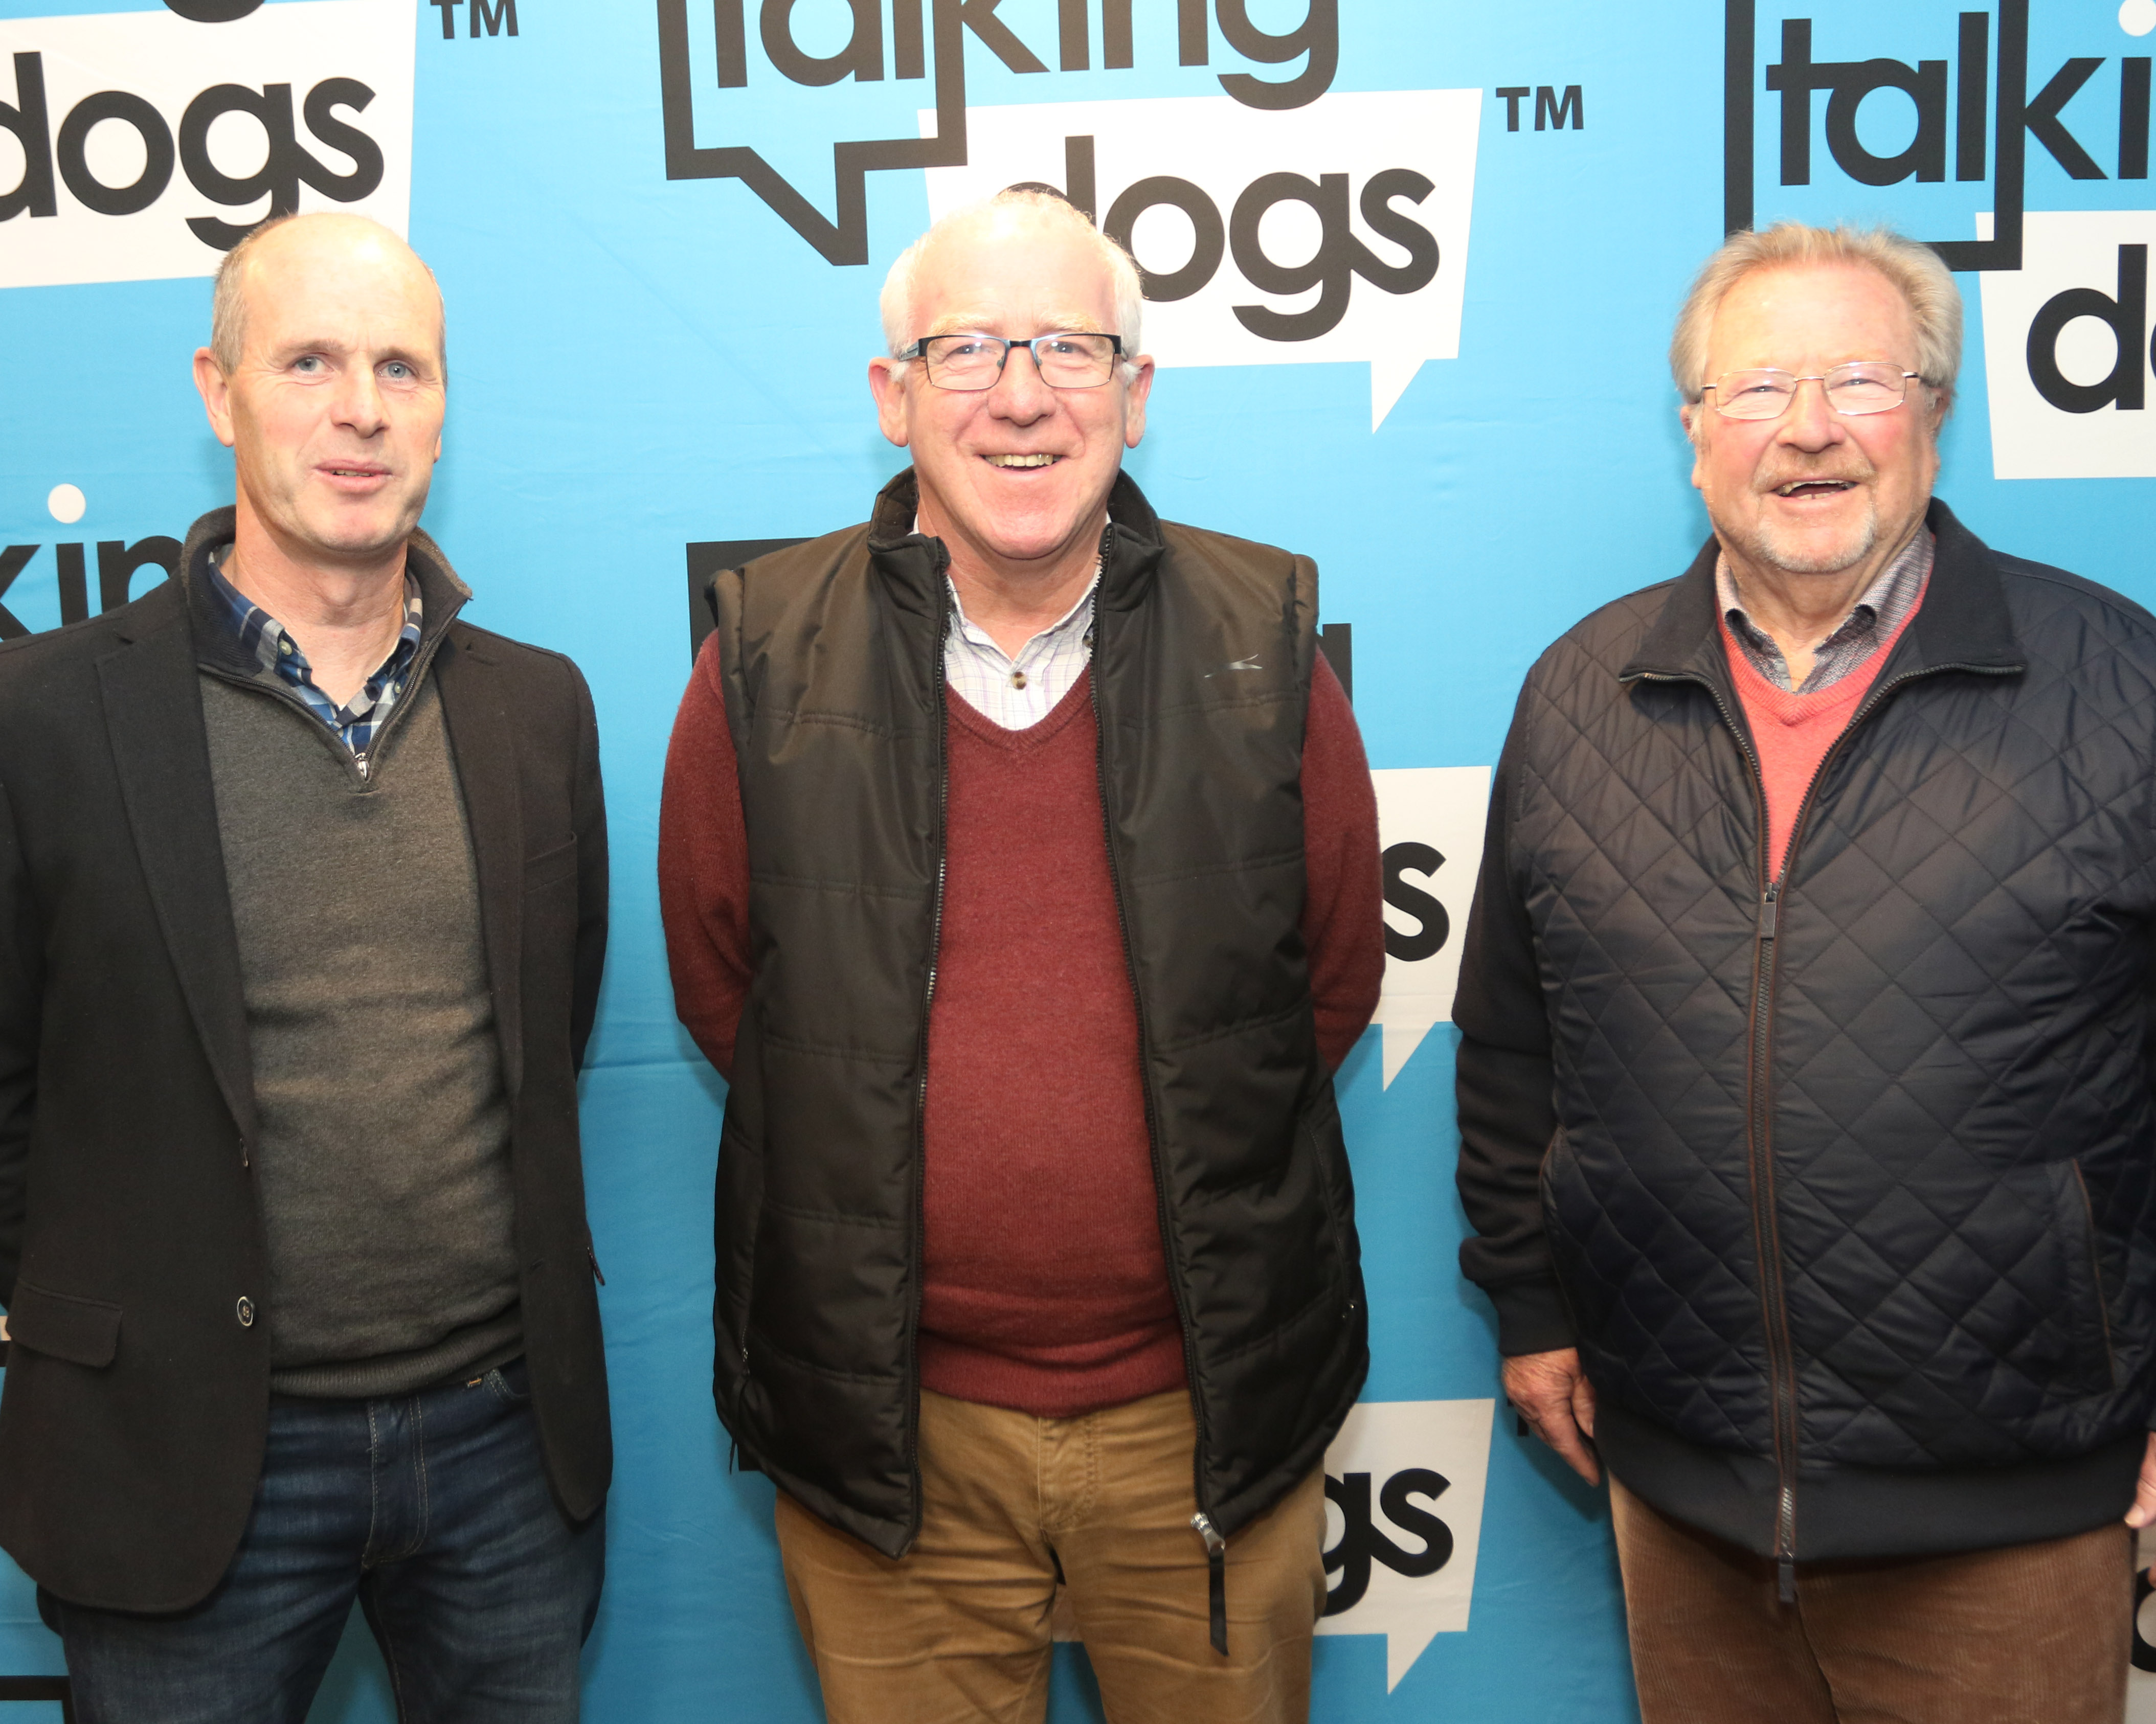 Talking Dogs Roadshow Limerick Pictures